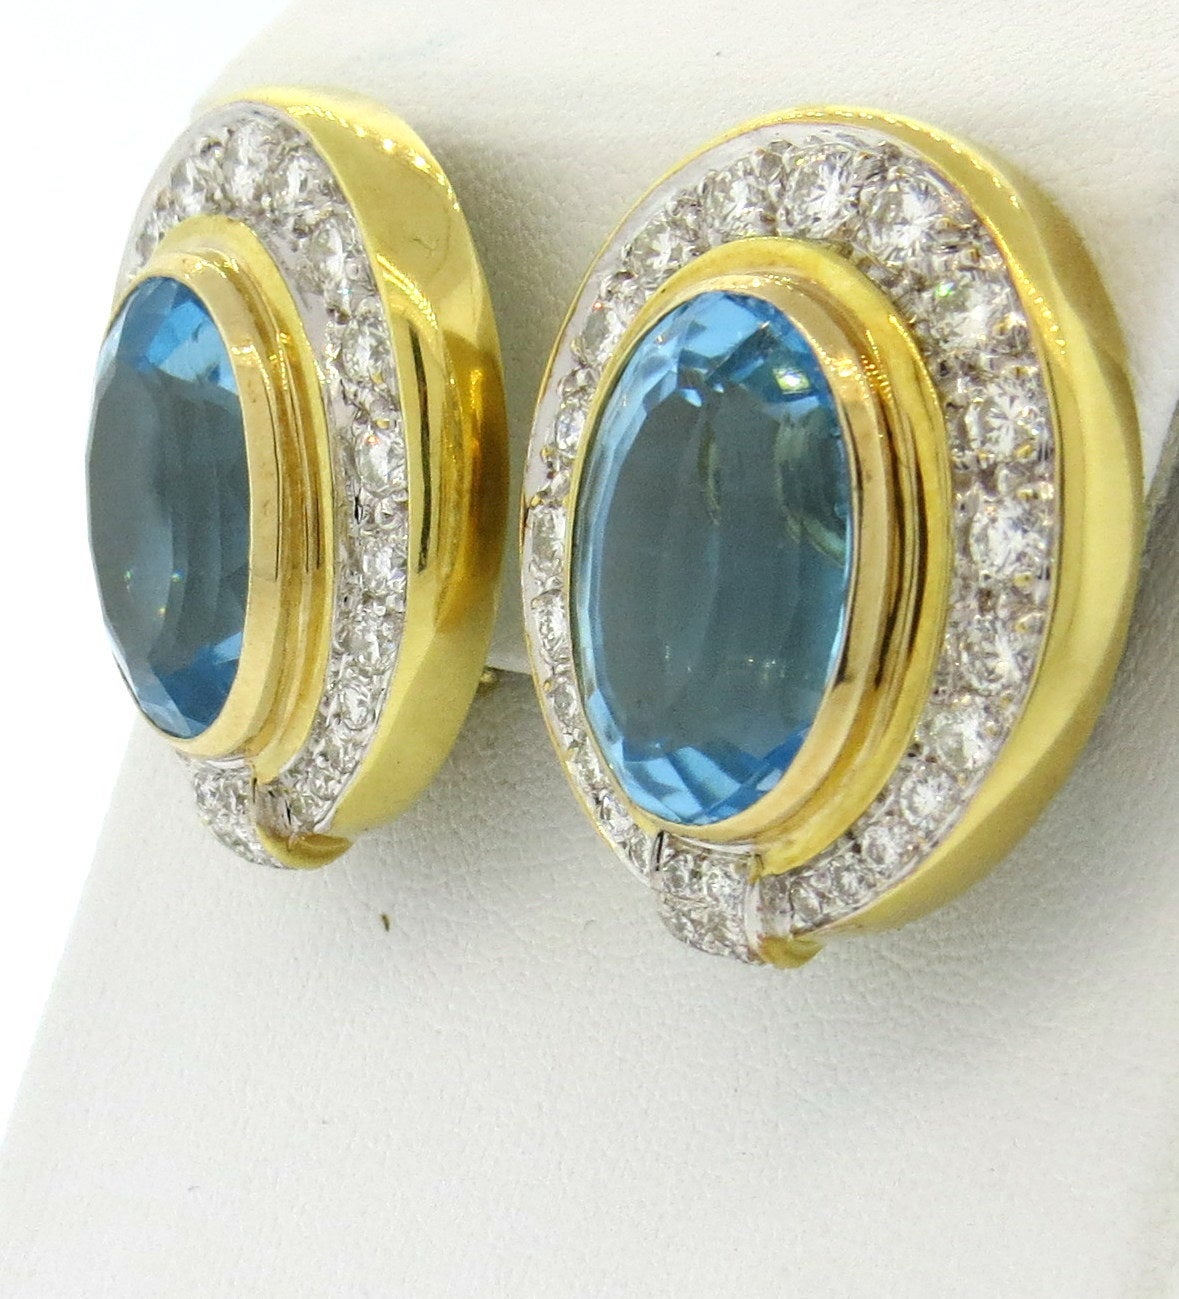 18k gold impressive earrings, featuring 18mm x 12.5mm blue topaz, surrounded with approximately 4.40ctw in VS1/H diamonds. Earrings are 30mm x 25mm. Weight - 30.1 grams